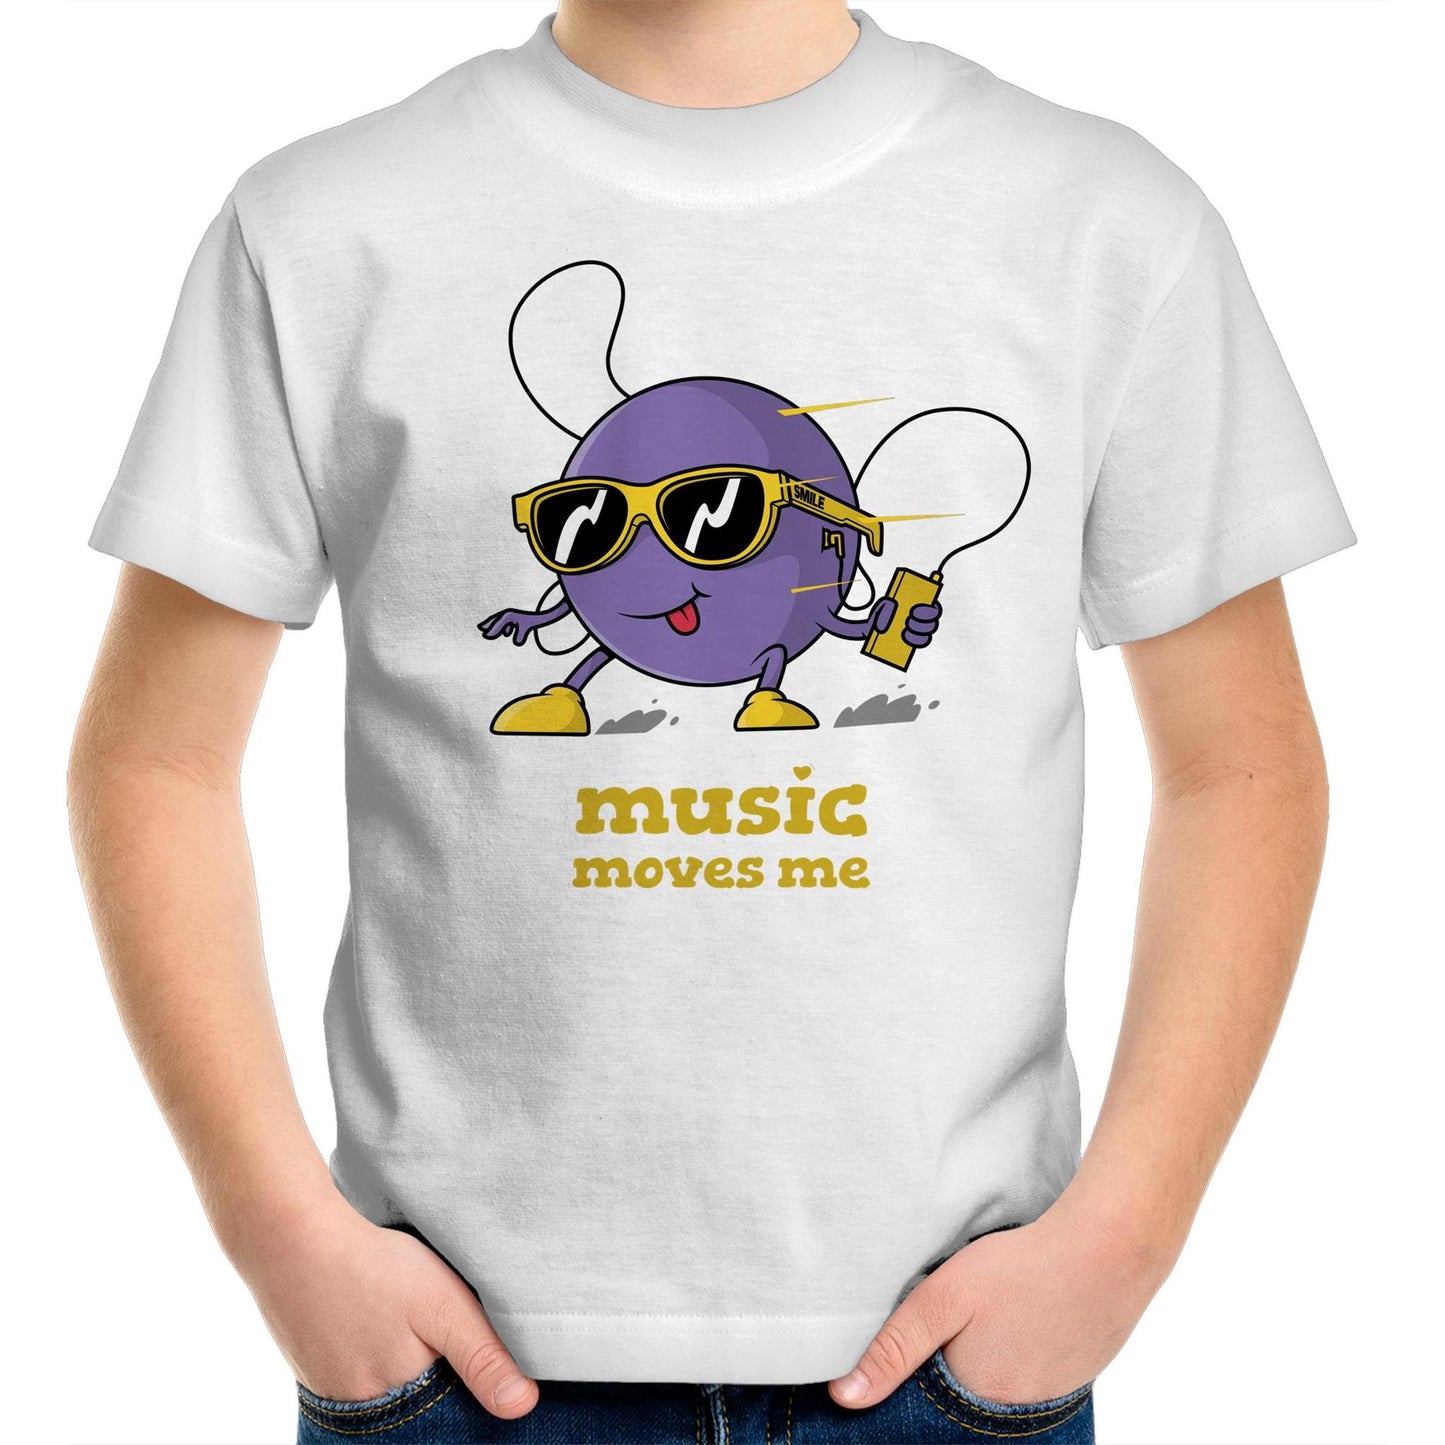 Music Moves Me, Earbuds - Kids Youth T-Shirt White Kids Youth T-shirt Music